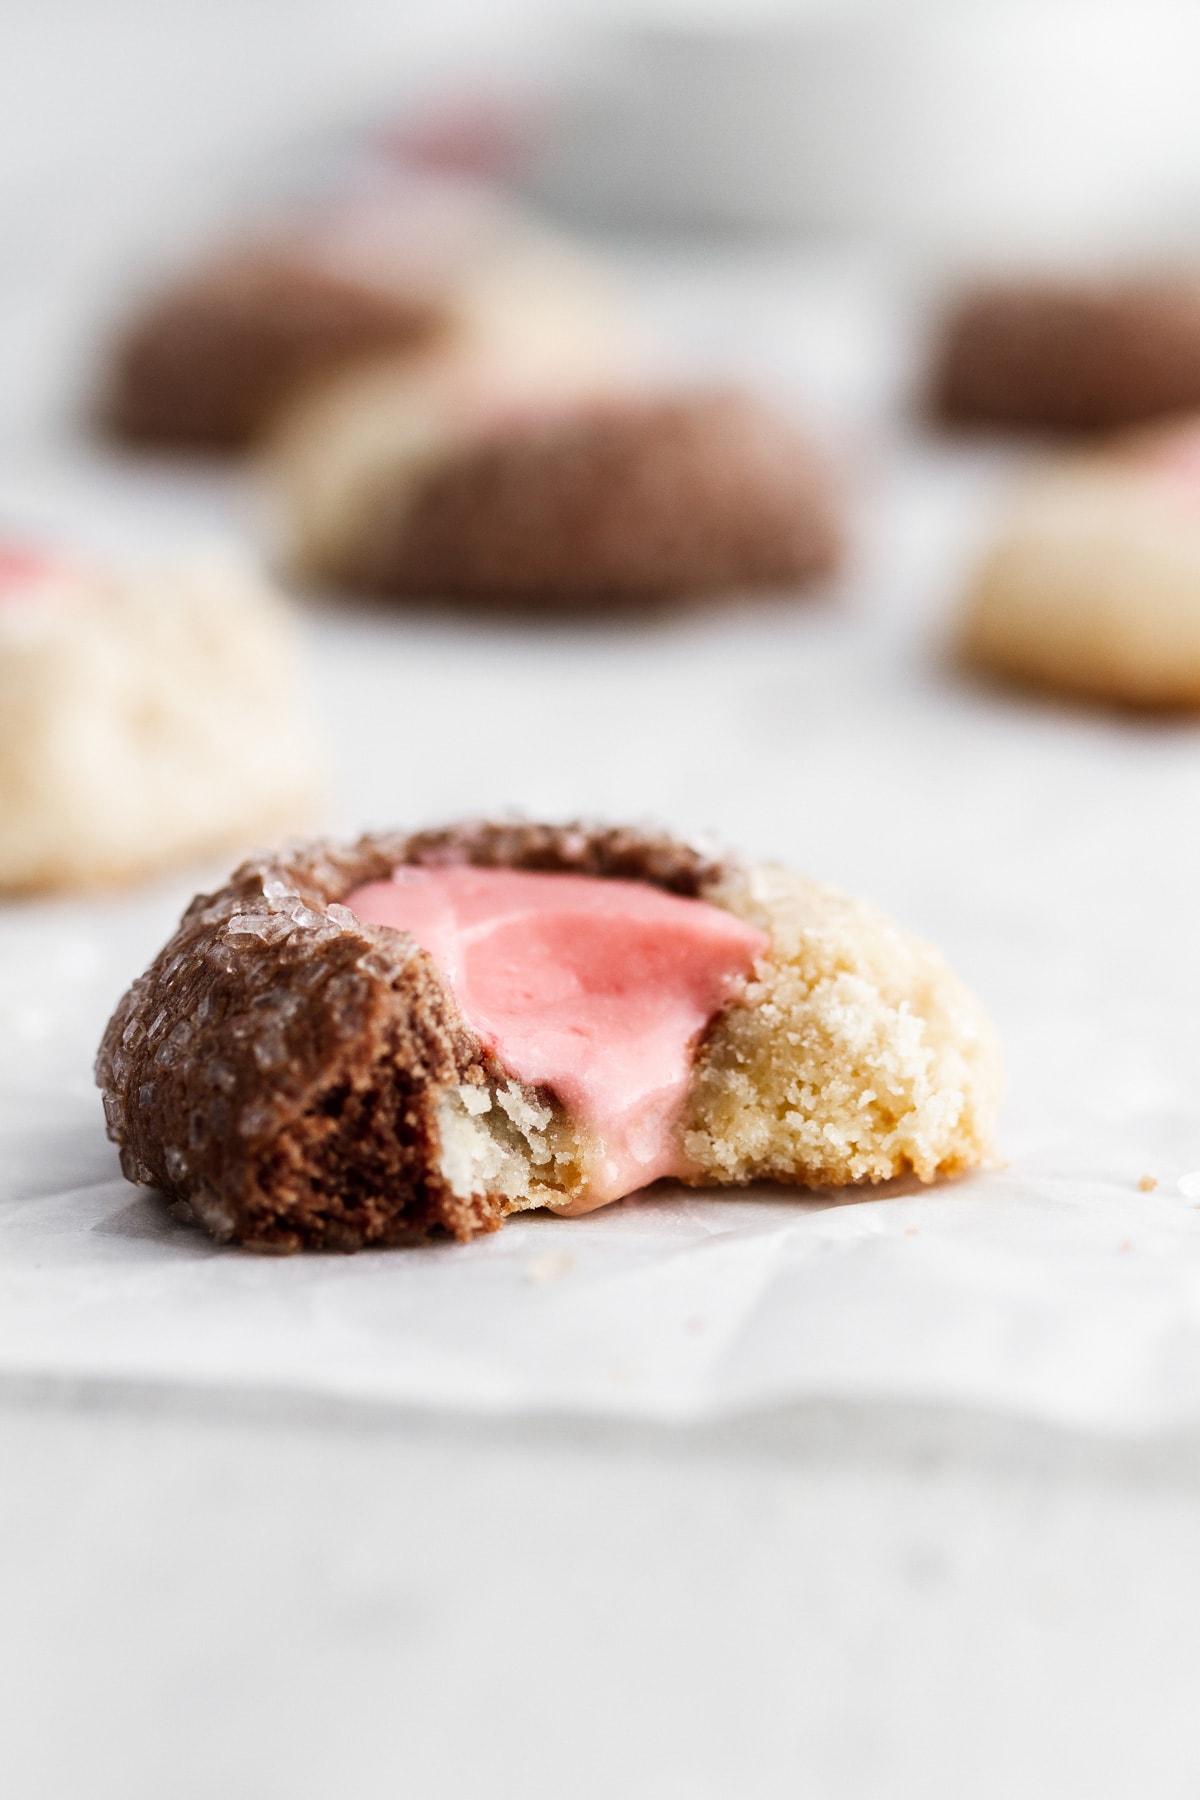 A close-up of a Neapolitan thumbprint cookie with a bite taken out of it